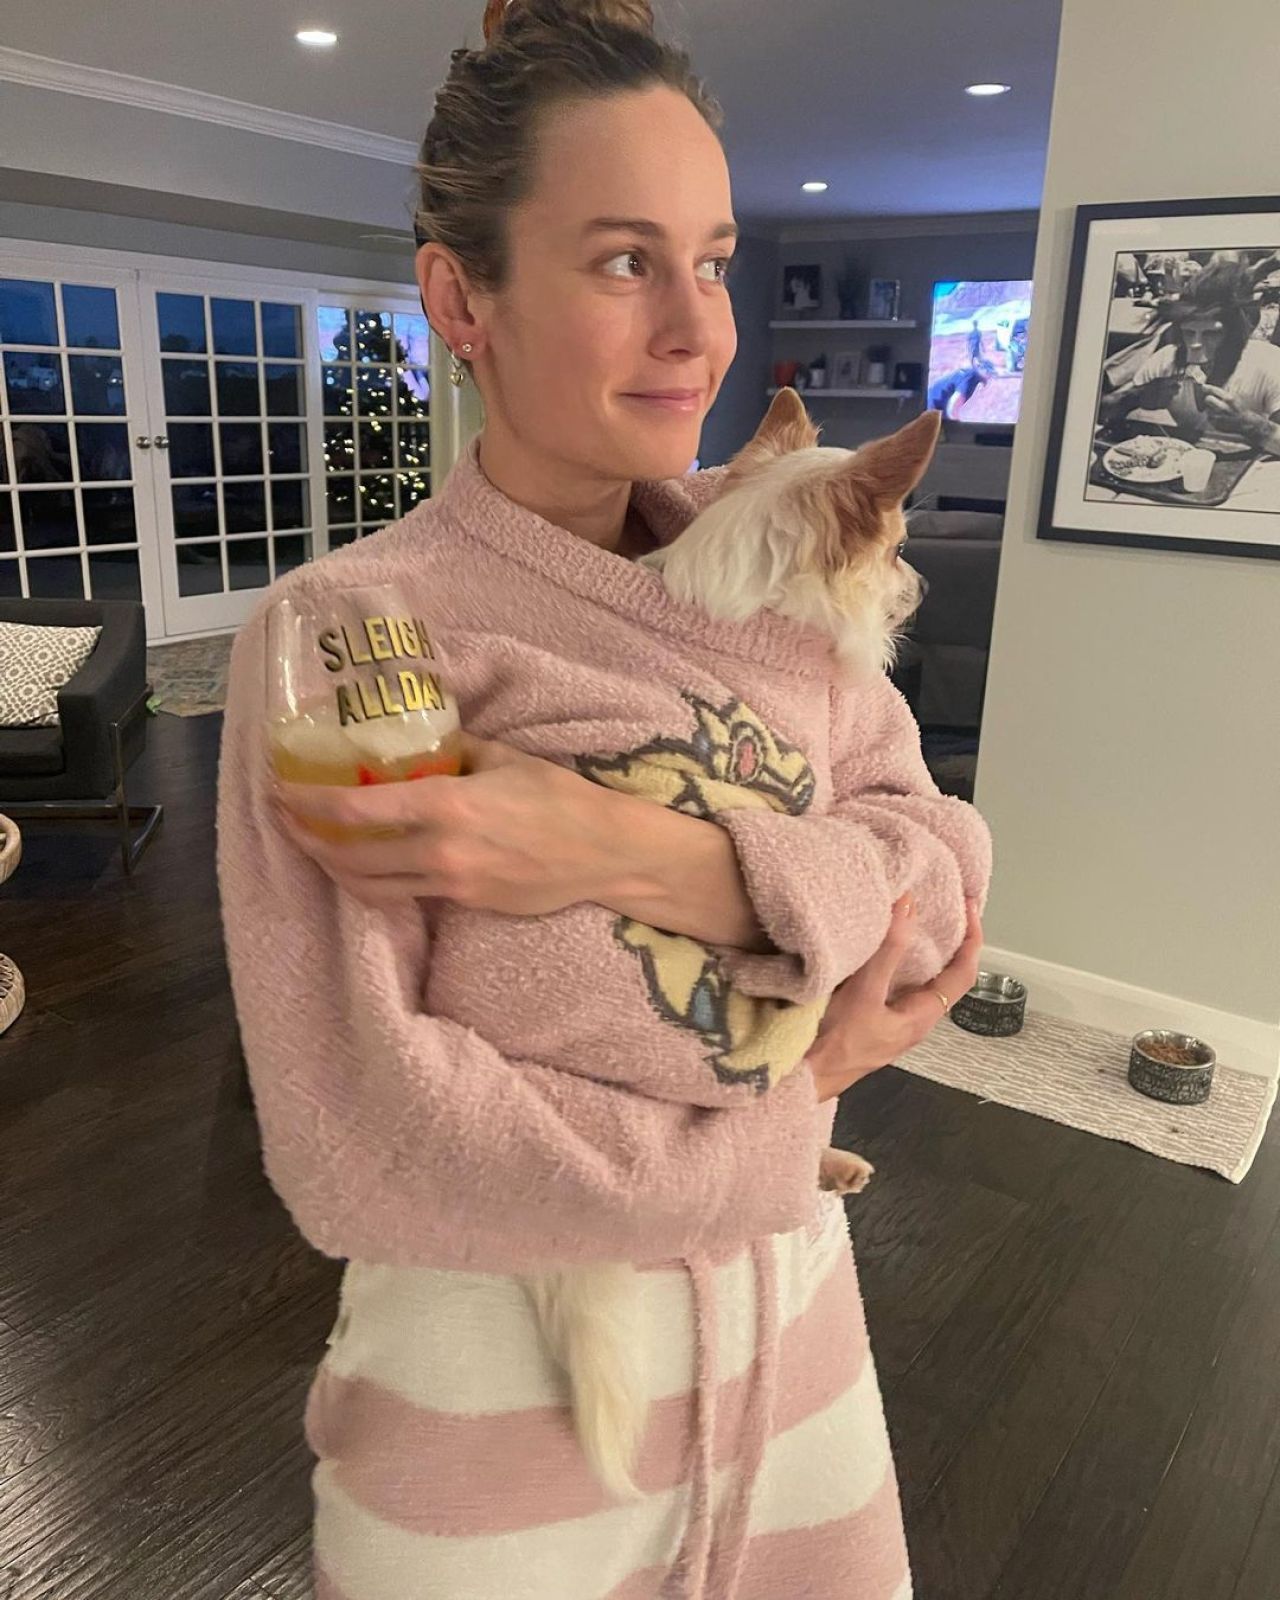 Cute Brie Larson goofing around with her dog